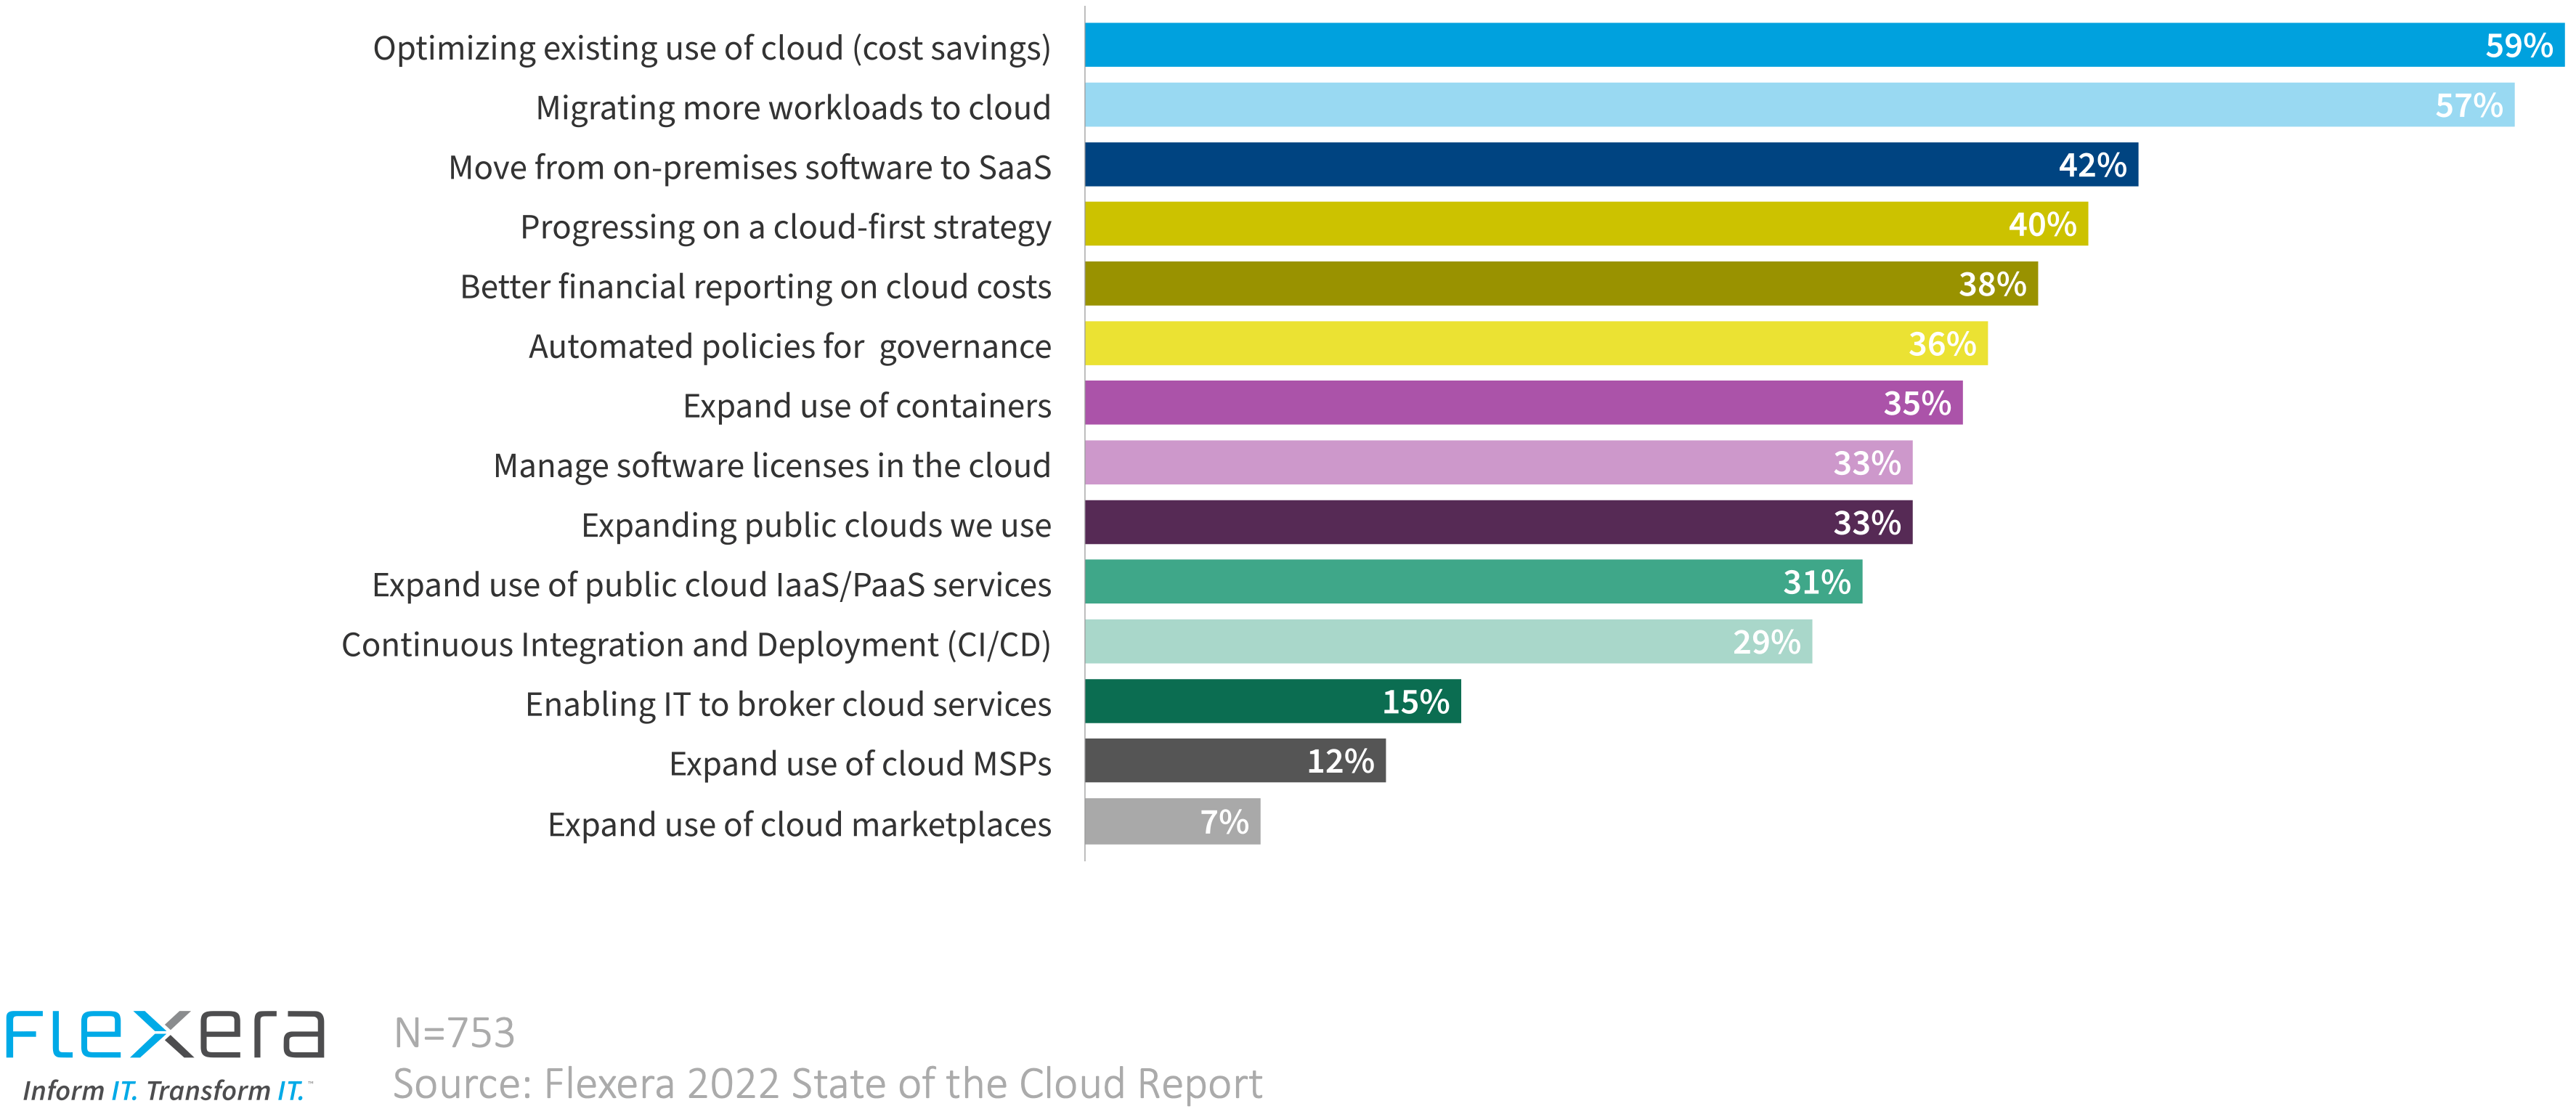 Top cloud initiatives for 2022 across all organizations